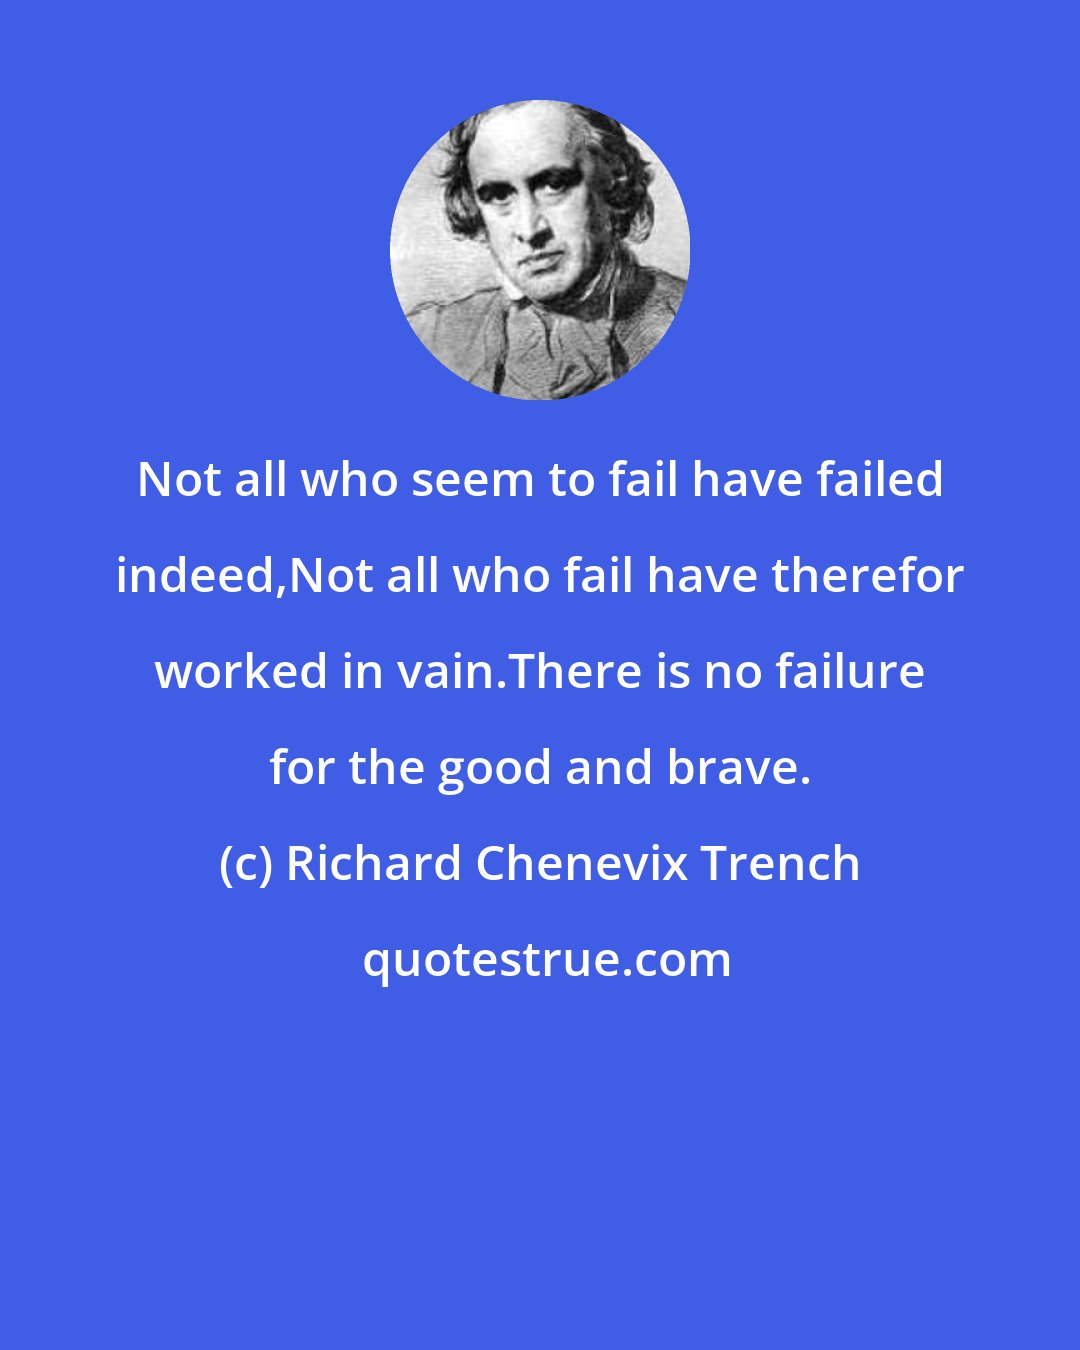 Richard Chenevix Trench: Not all who seem to fail have failed indeed,Not all who fail have therefor worked in vain.There is no failure for the good and brave.